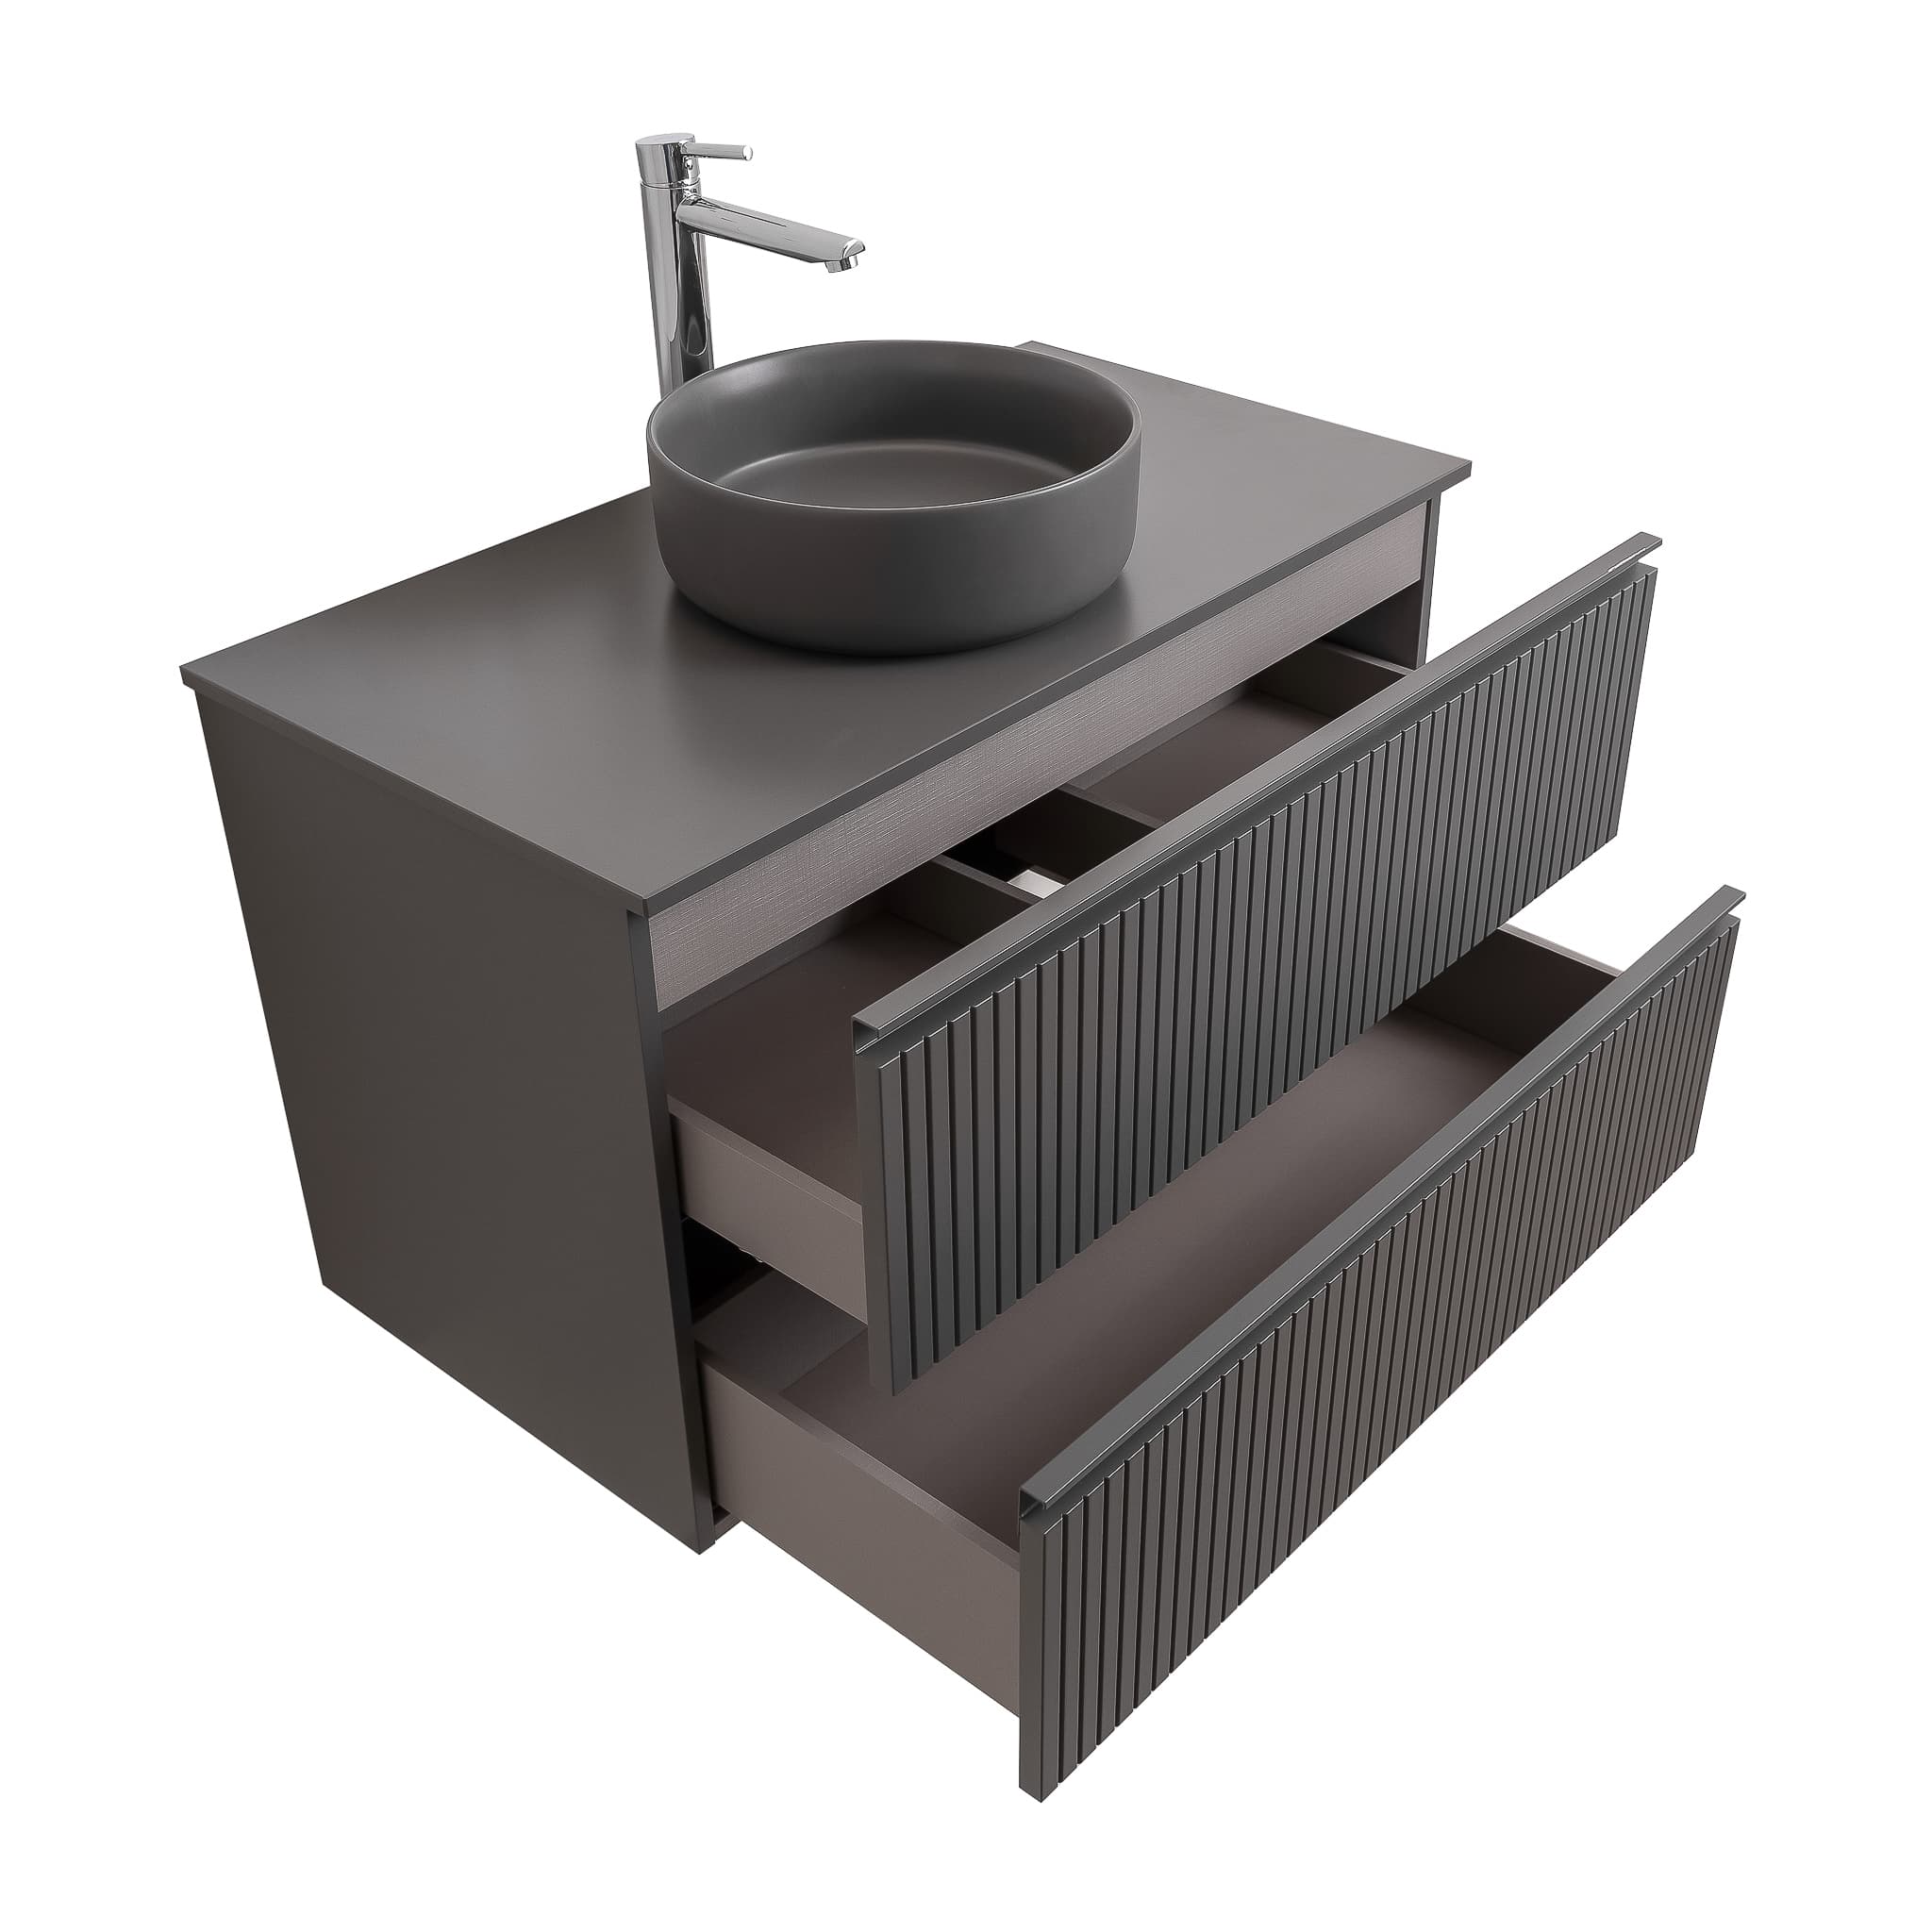 Ares 31.5 Matte Grey Cabinet, Ares Grey Ceniza Top And Ares Grey Ceniza Ceramic Basin, Wall Mounted Modern Vanity Set